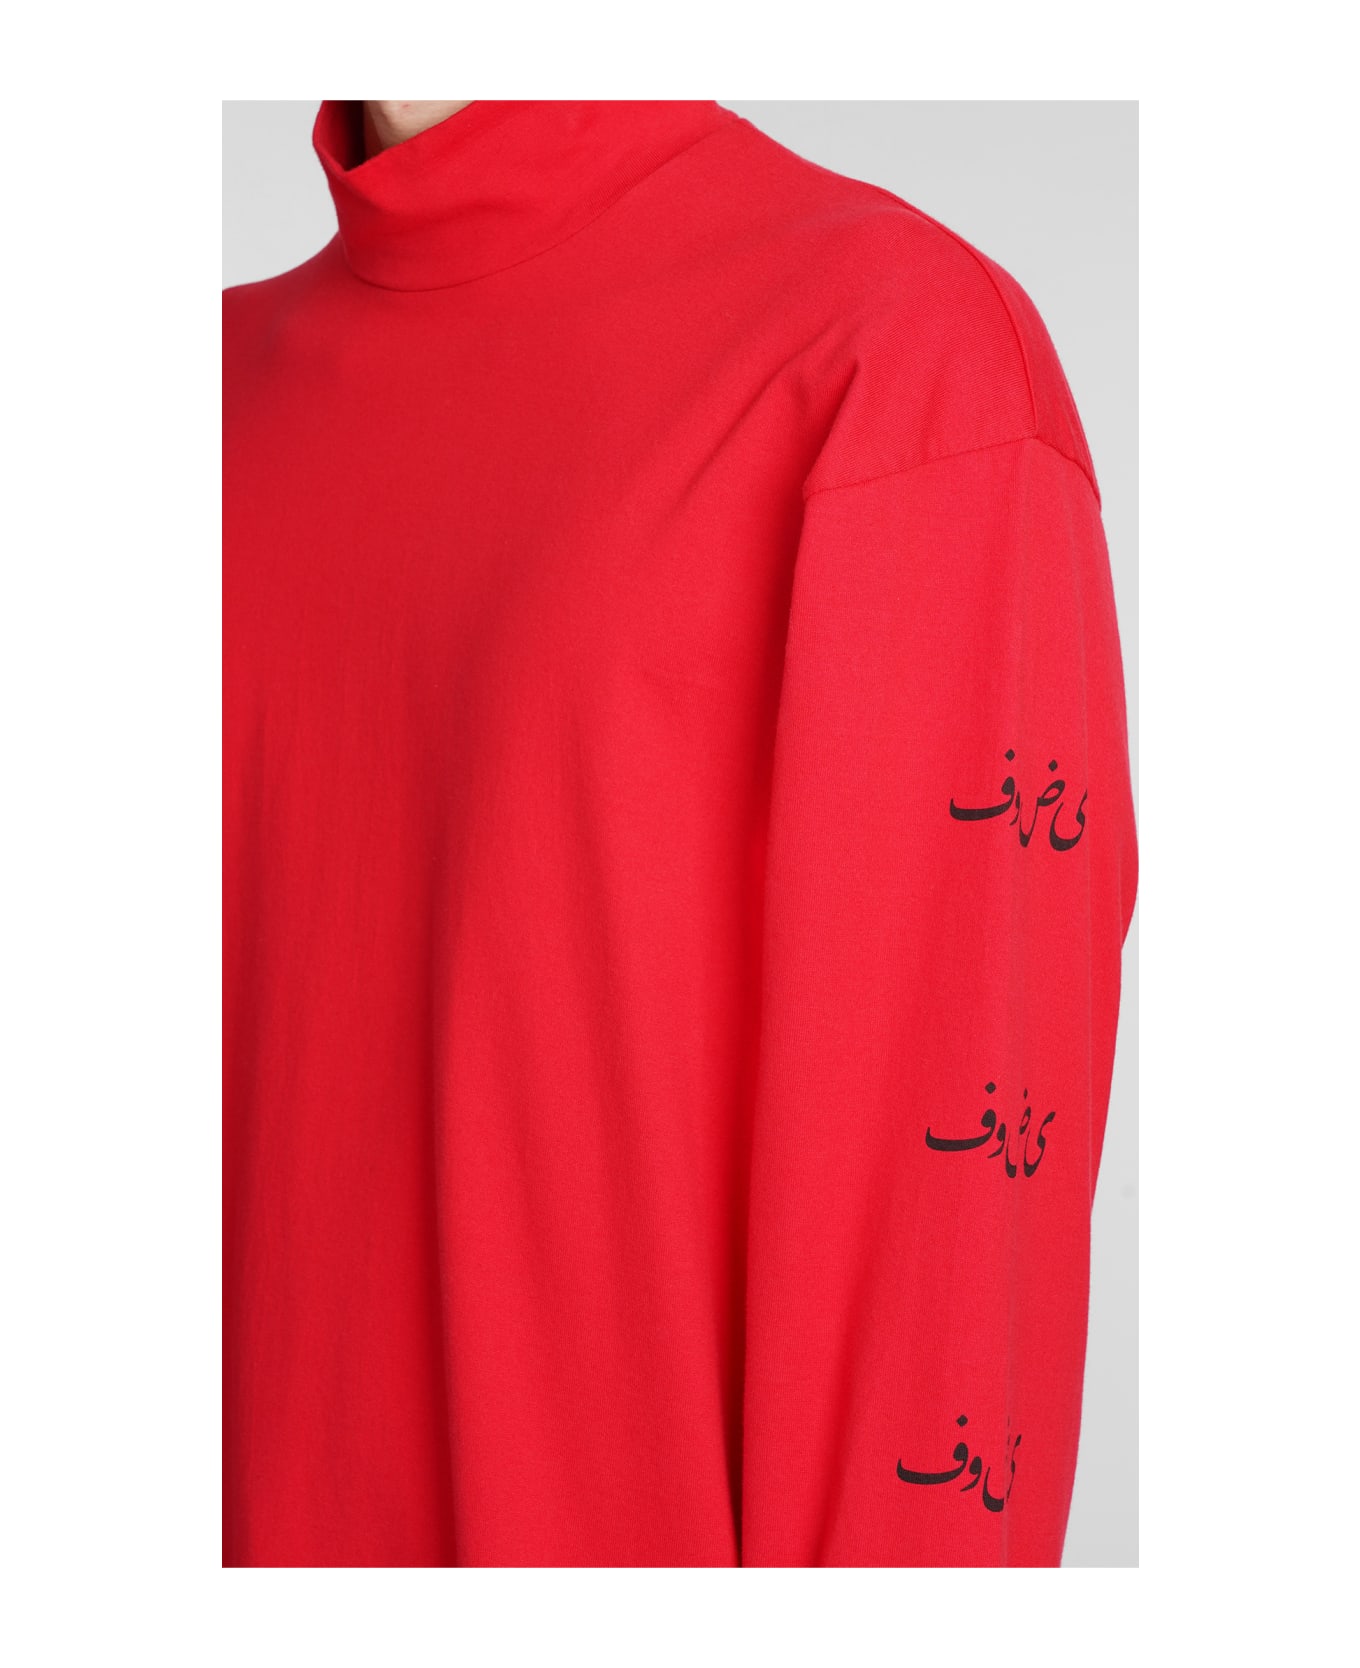 Undercover Jun Takahashi T-shirt In Red Cotton - red